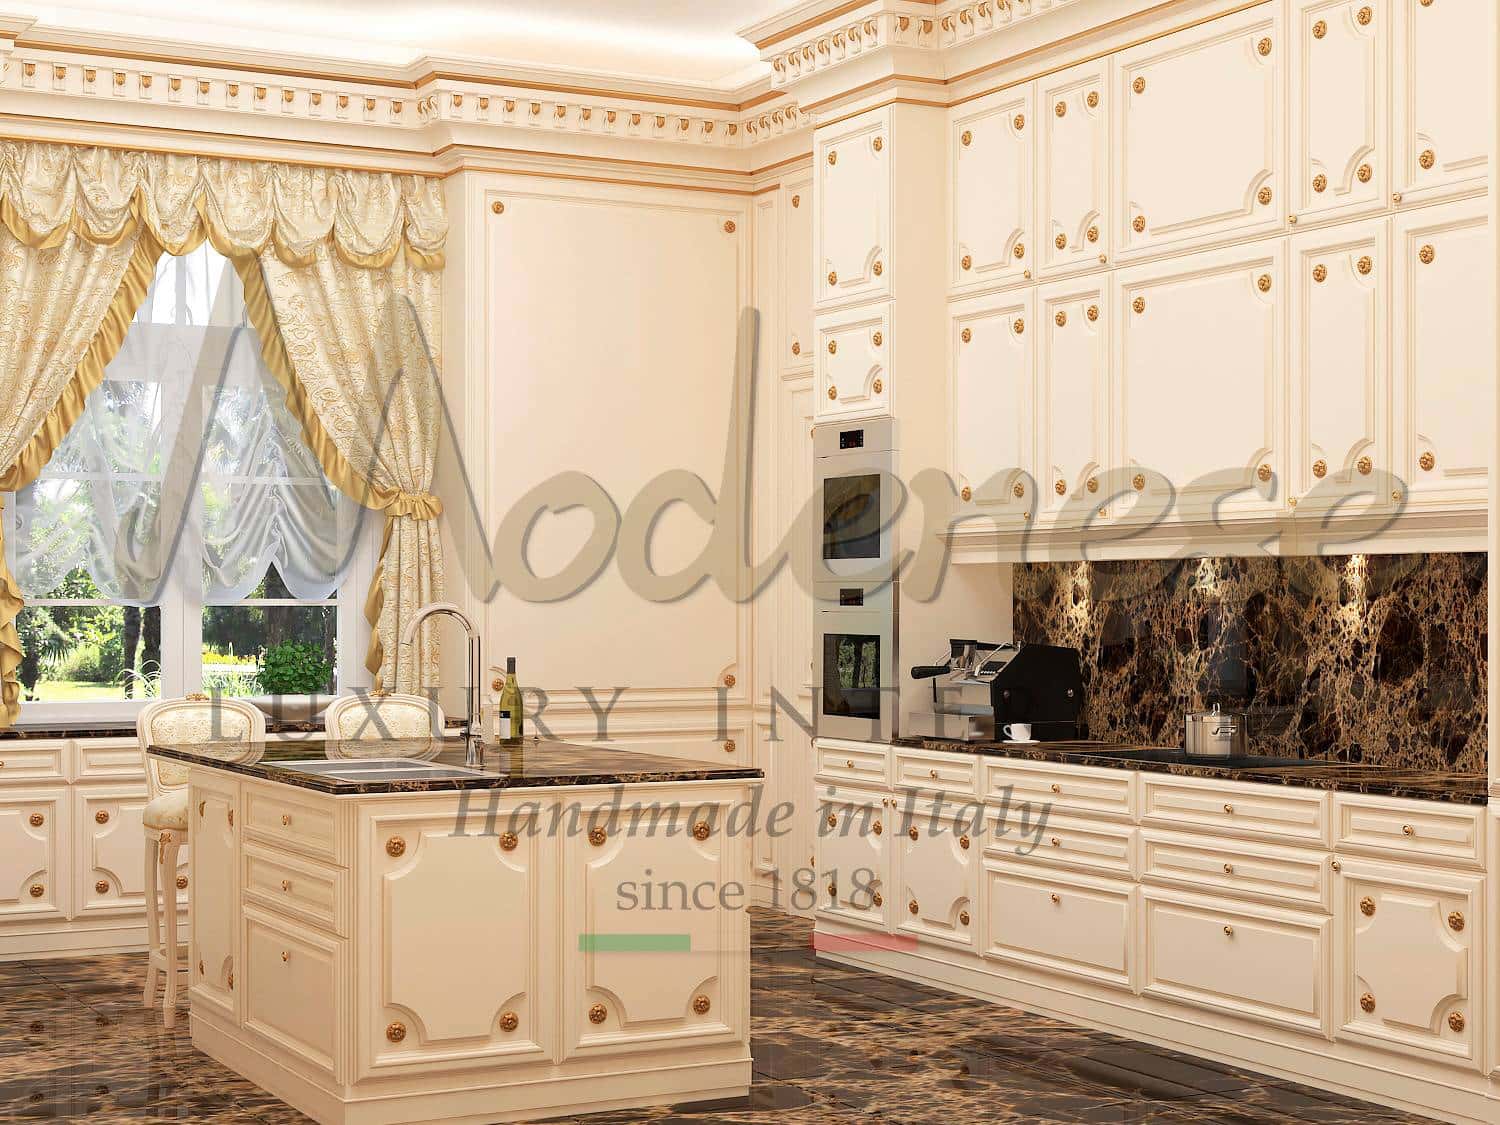 fit out fixed furniture royal luxury custom kitchen project solid wood golden leaf details carved solid wood handcrafted custom style handmade production by master woodworking artisans